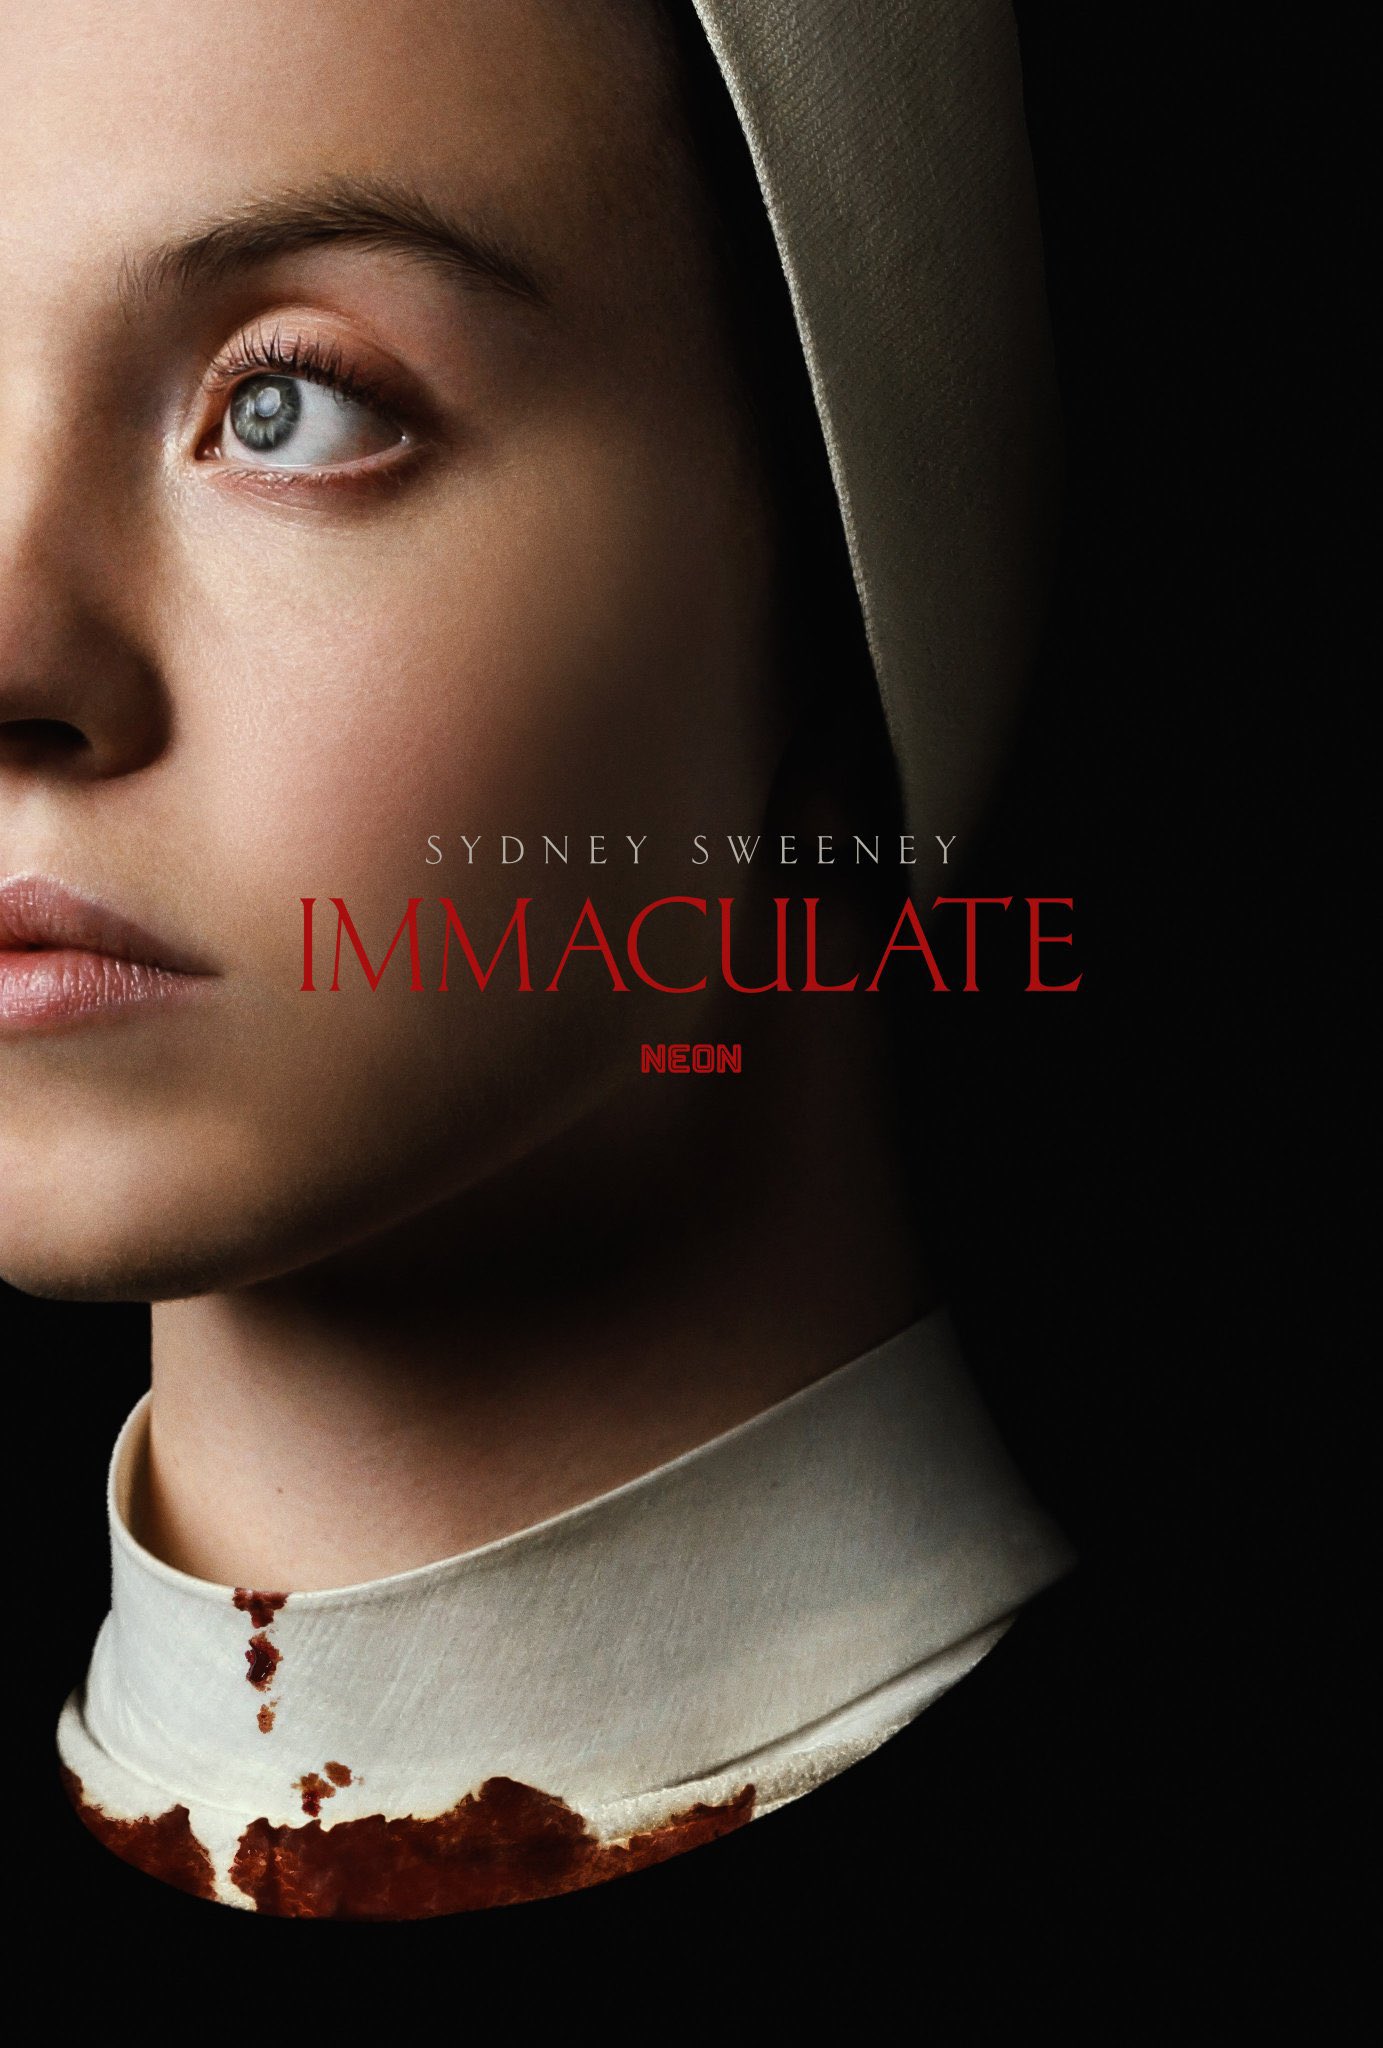 Immaculate Sydney Sweeney Poster